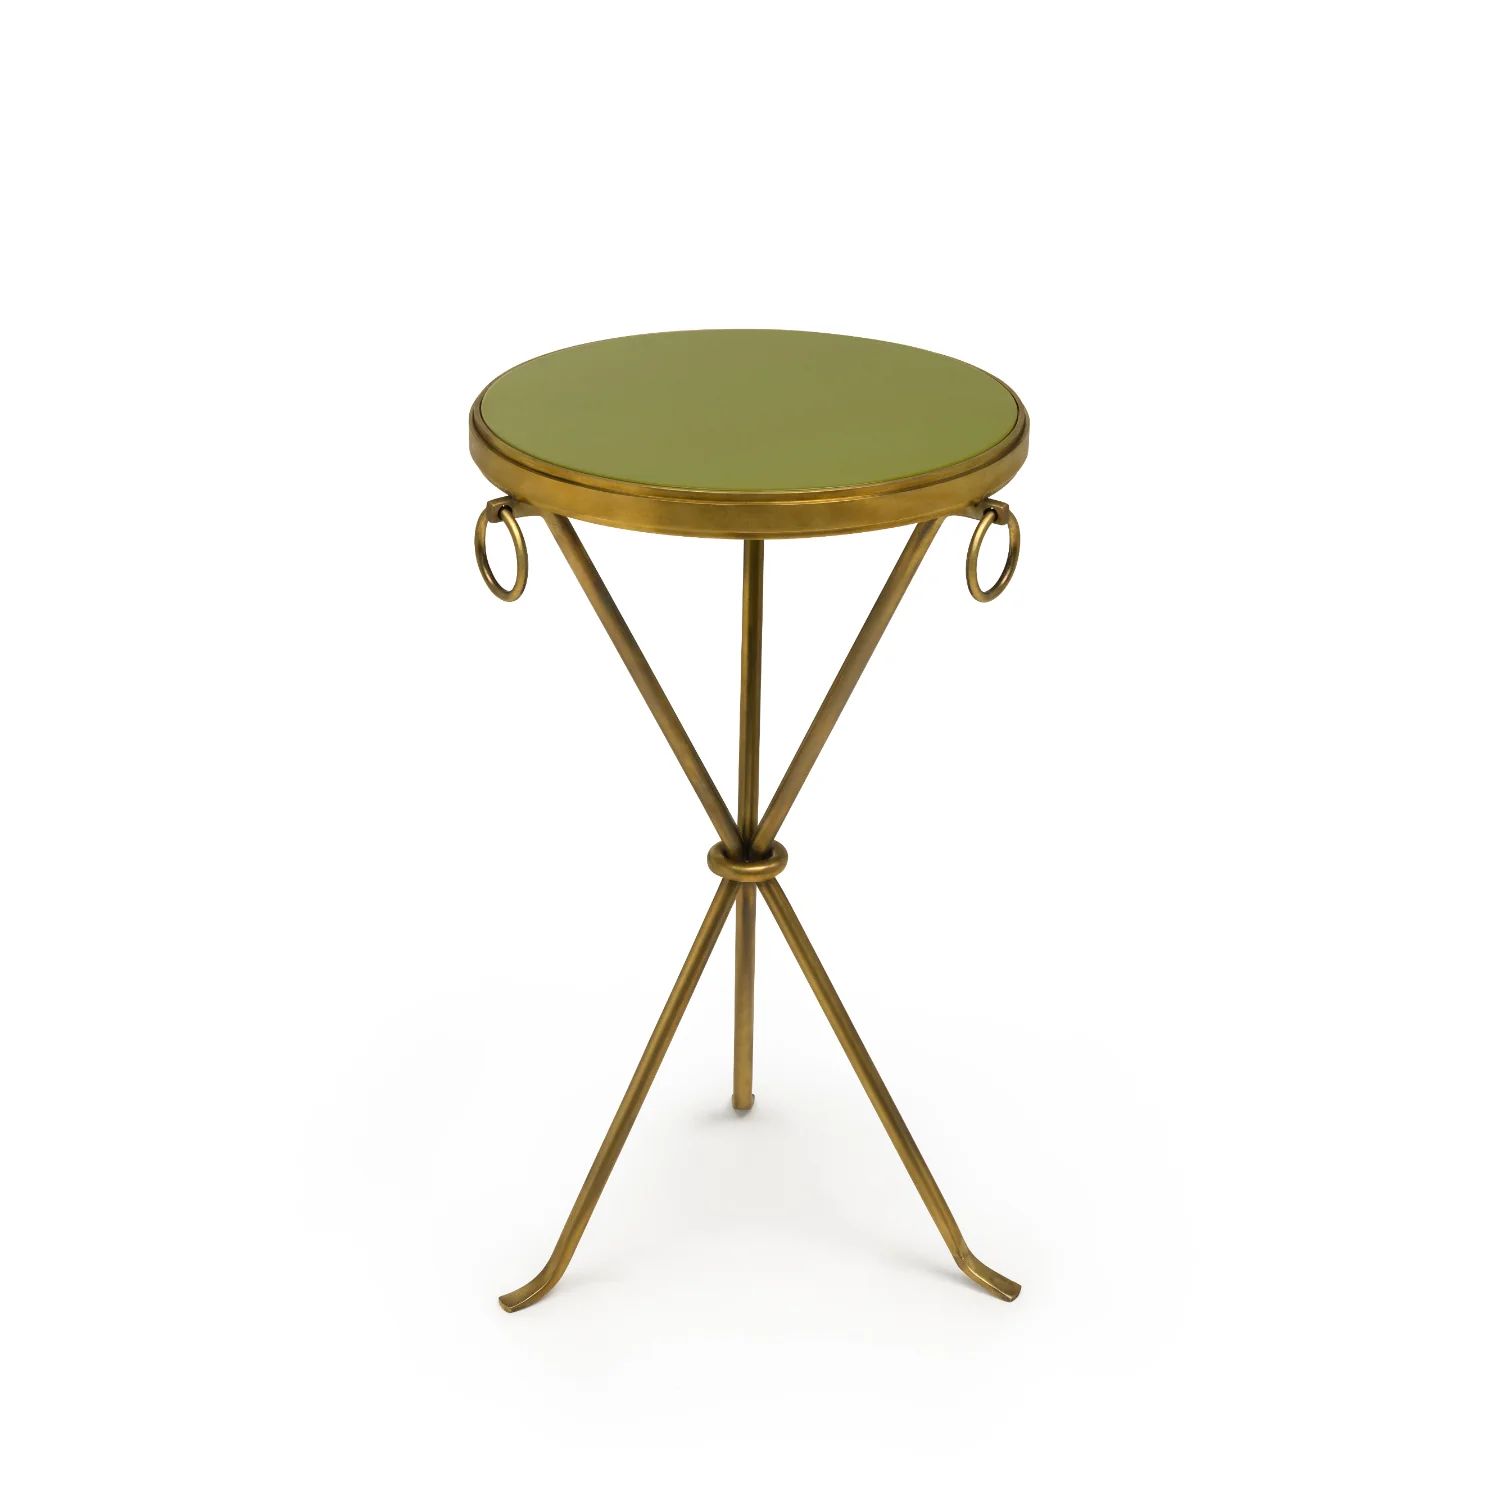 Lacquer Drinks Table Brass Base, Green by The Lacquer Company
 – Paloma and Co. | Paloma & Co.